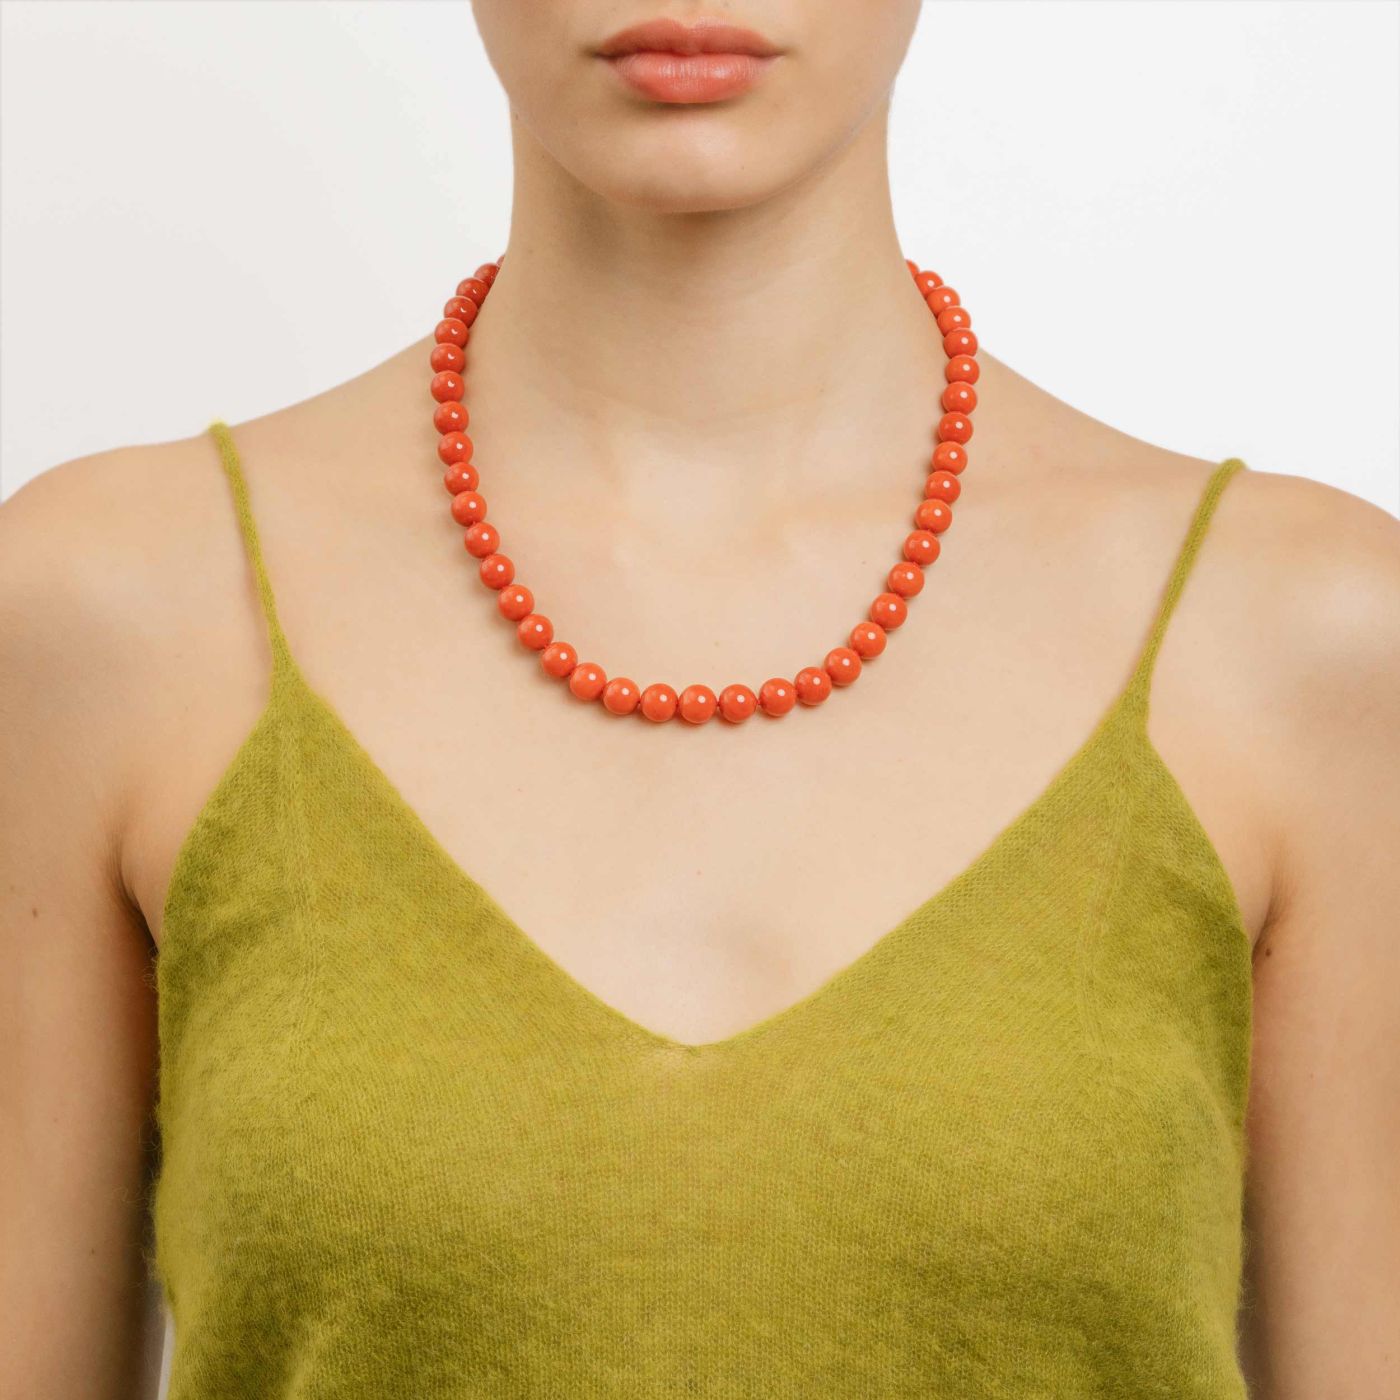 Rose gold necklace with coral balls